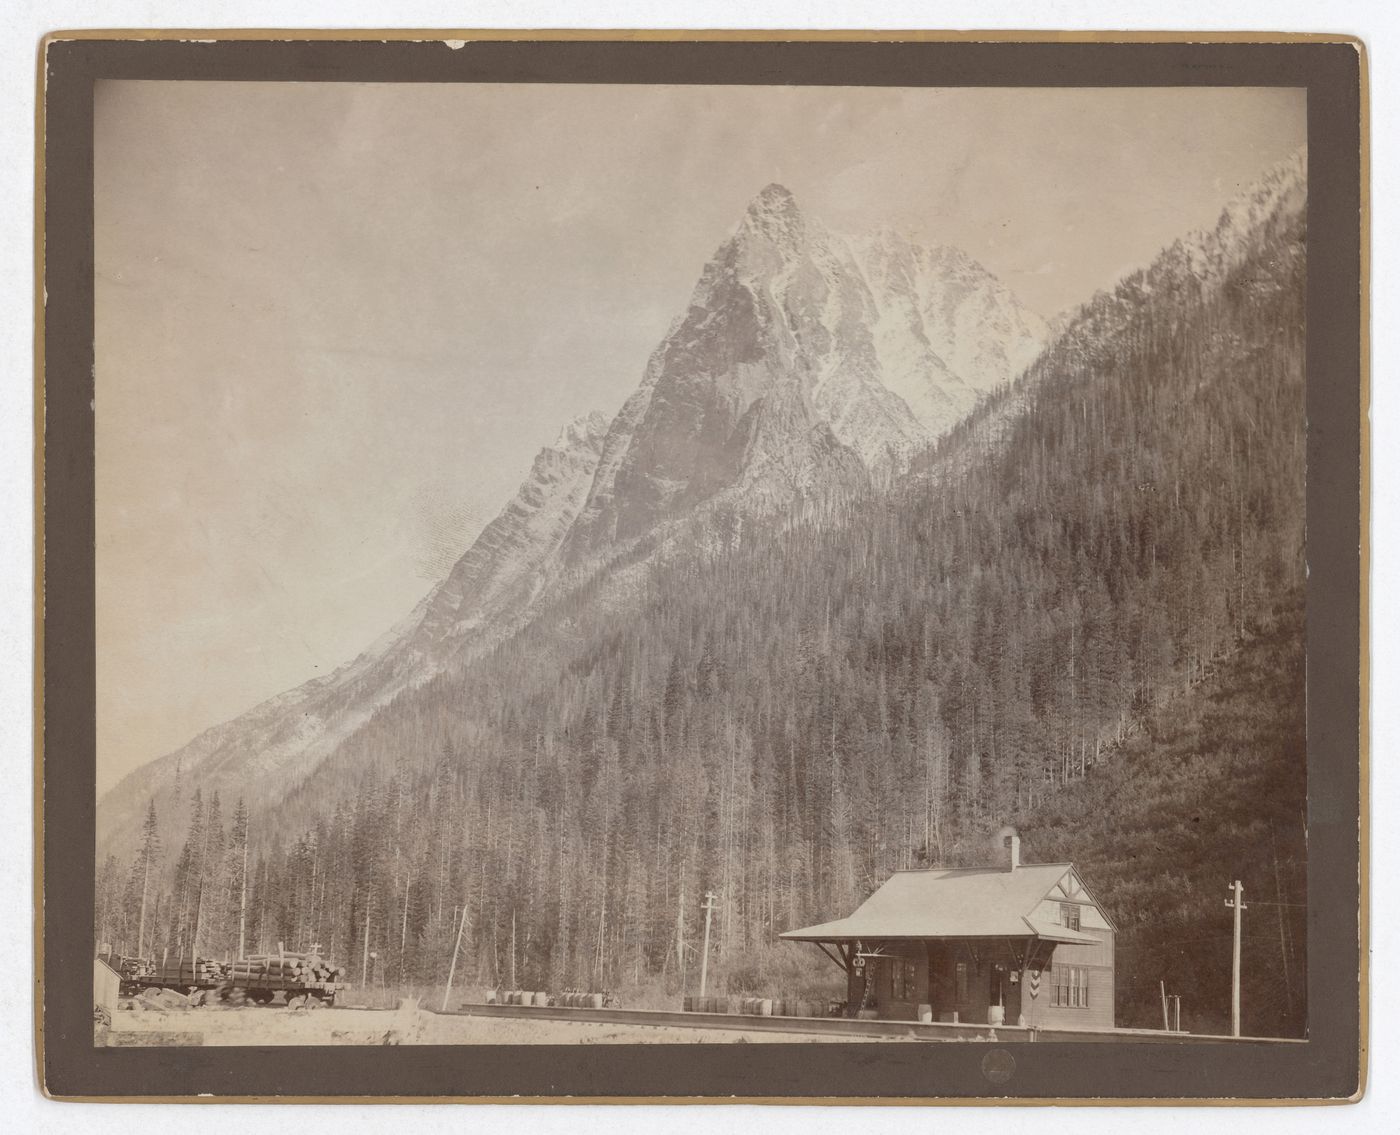 View of Mount Macdonald and Canadian Pacific Railway station with barrels and freight cars, Rogers Pass, British Columbia, Canada